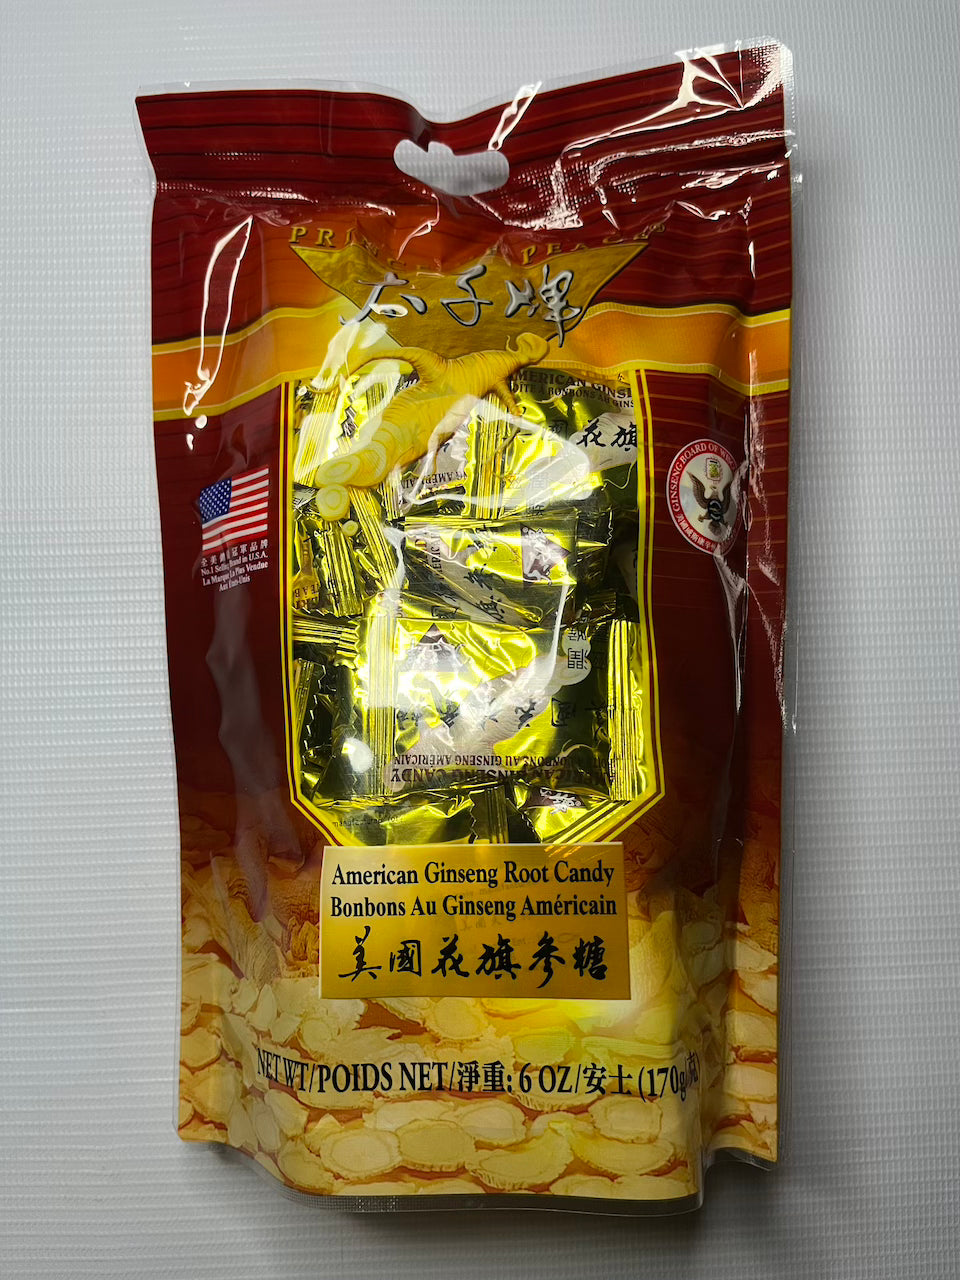 American Ginseng Root Candy 美国花旗糖 6oz